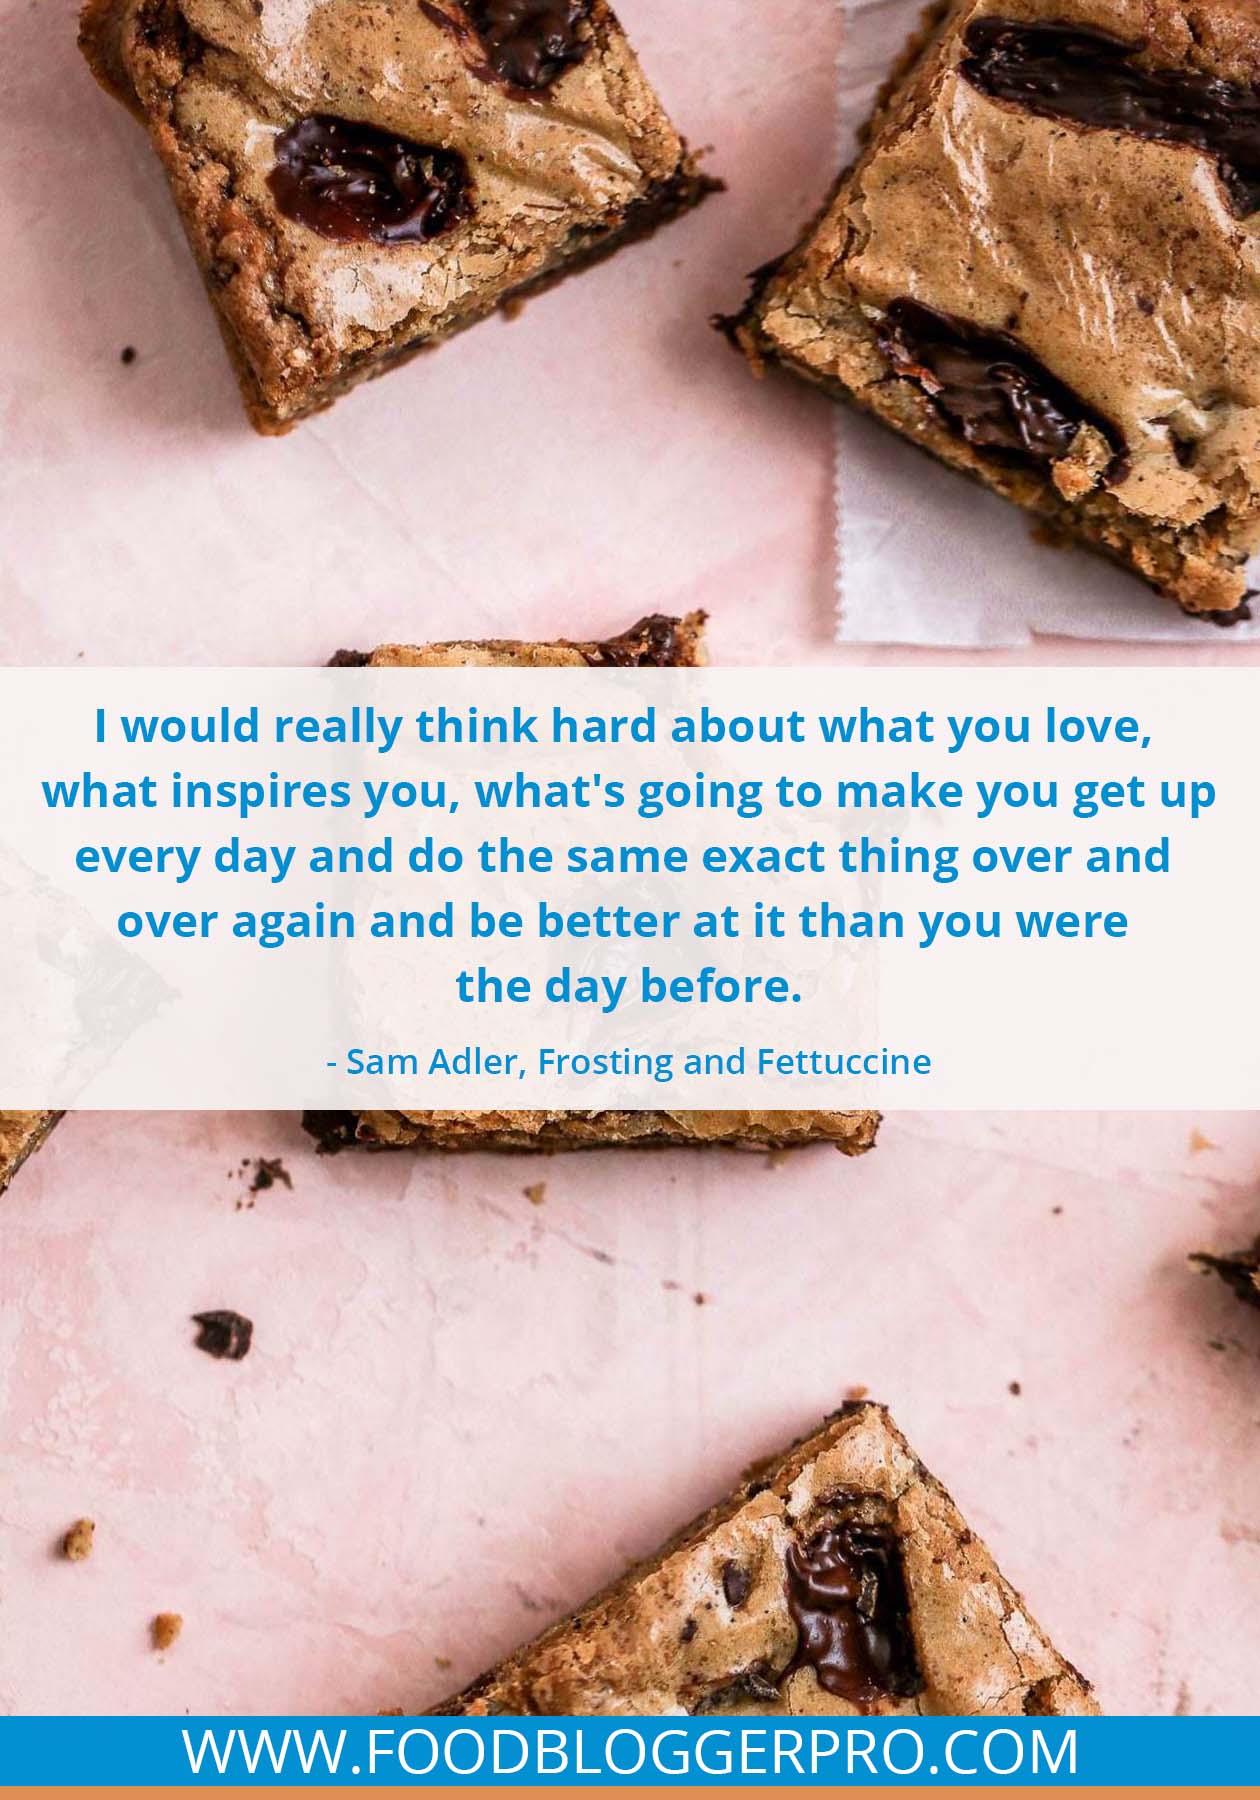 A quote from Sam Alder’s appearance on the Food Blogger Pro podcast that says, 'I would really think hard about what you love, what inspires you, what’s going to make you get up every day and do the same exact thing over and over again and be better at it than you were the day before.'